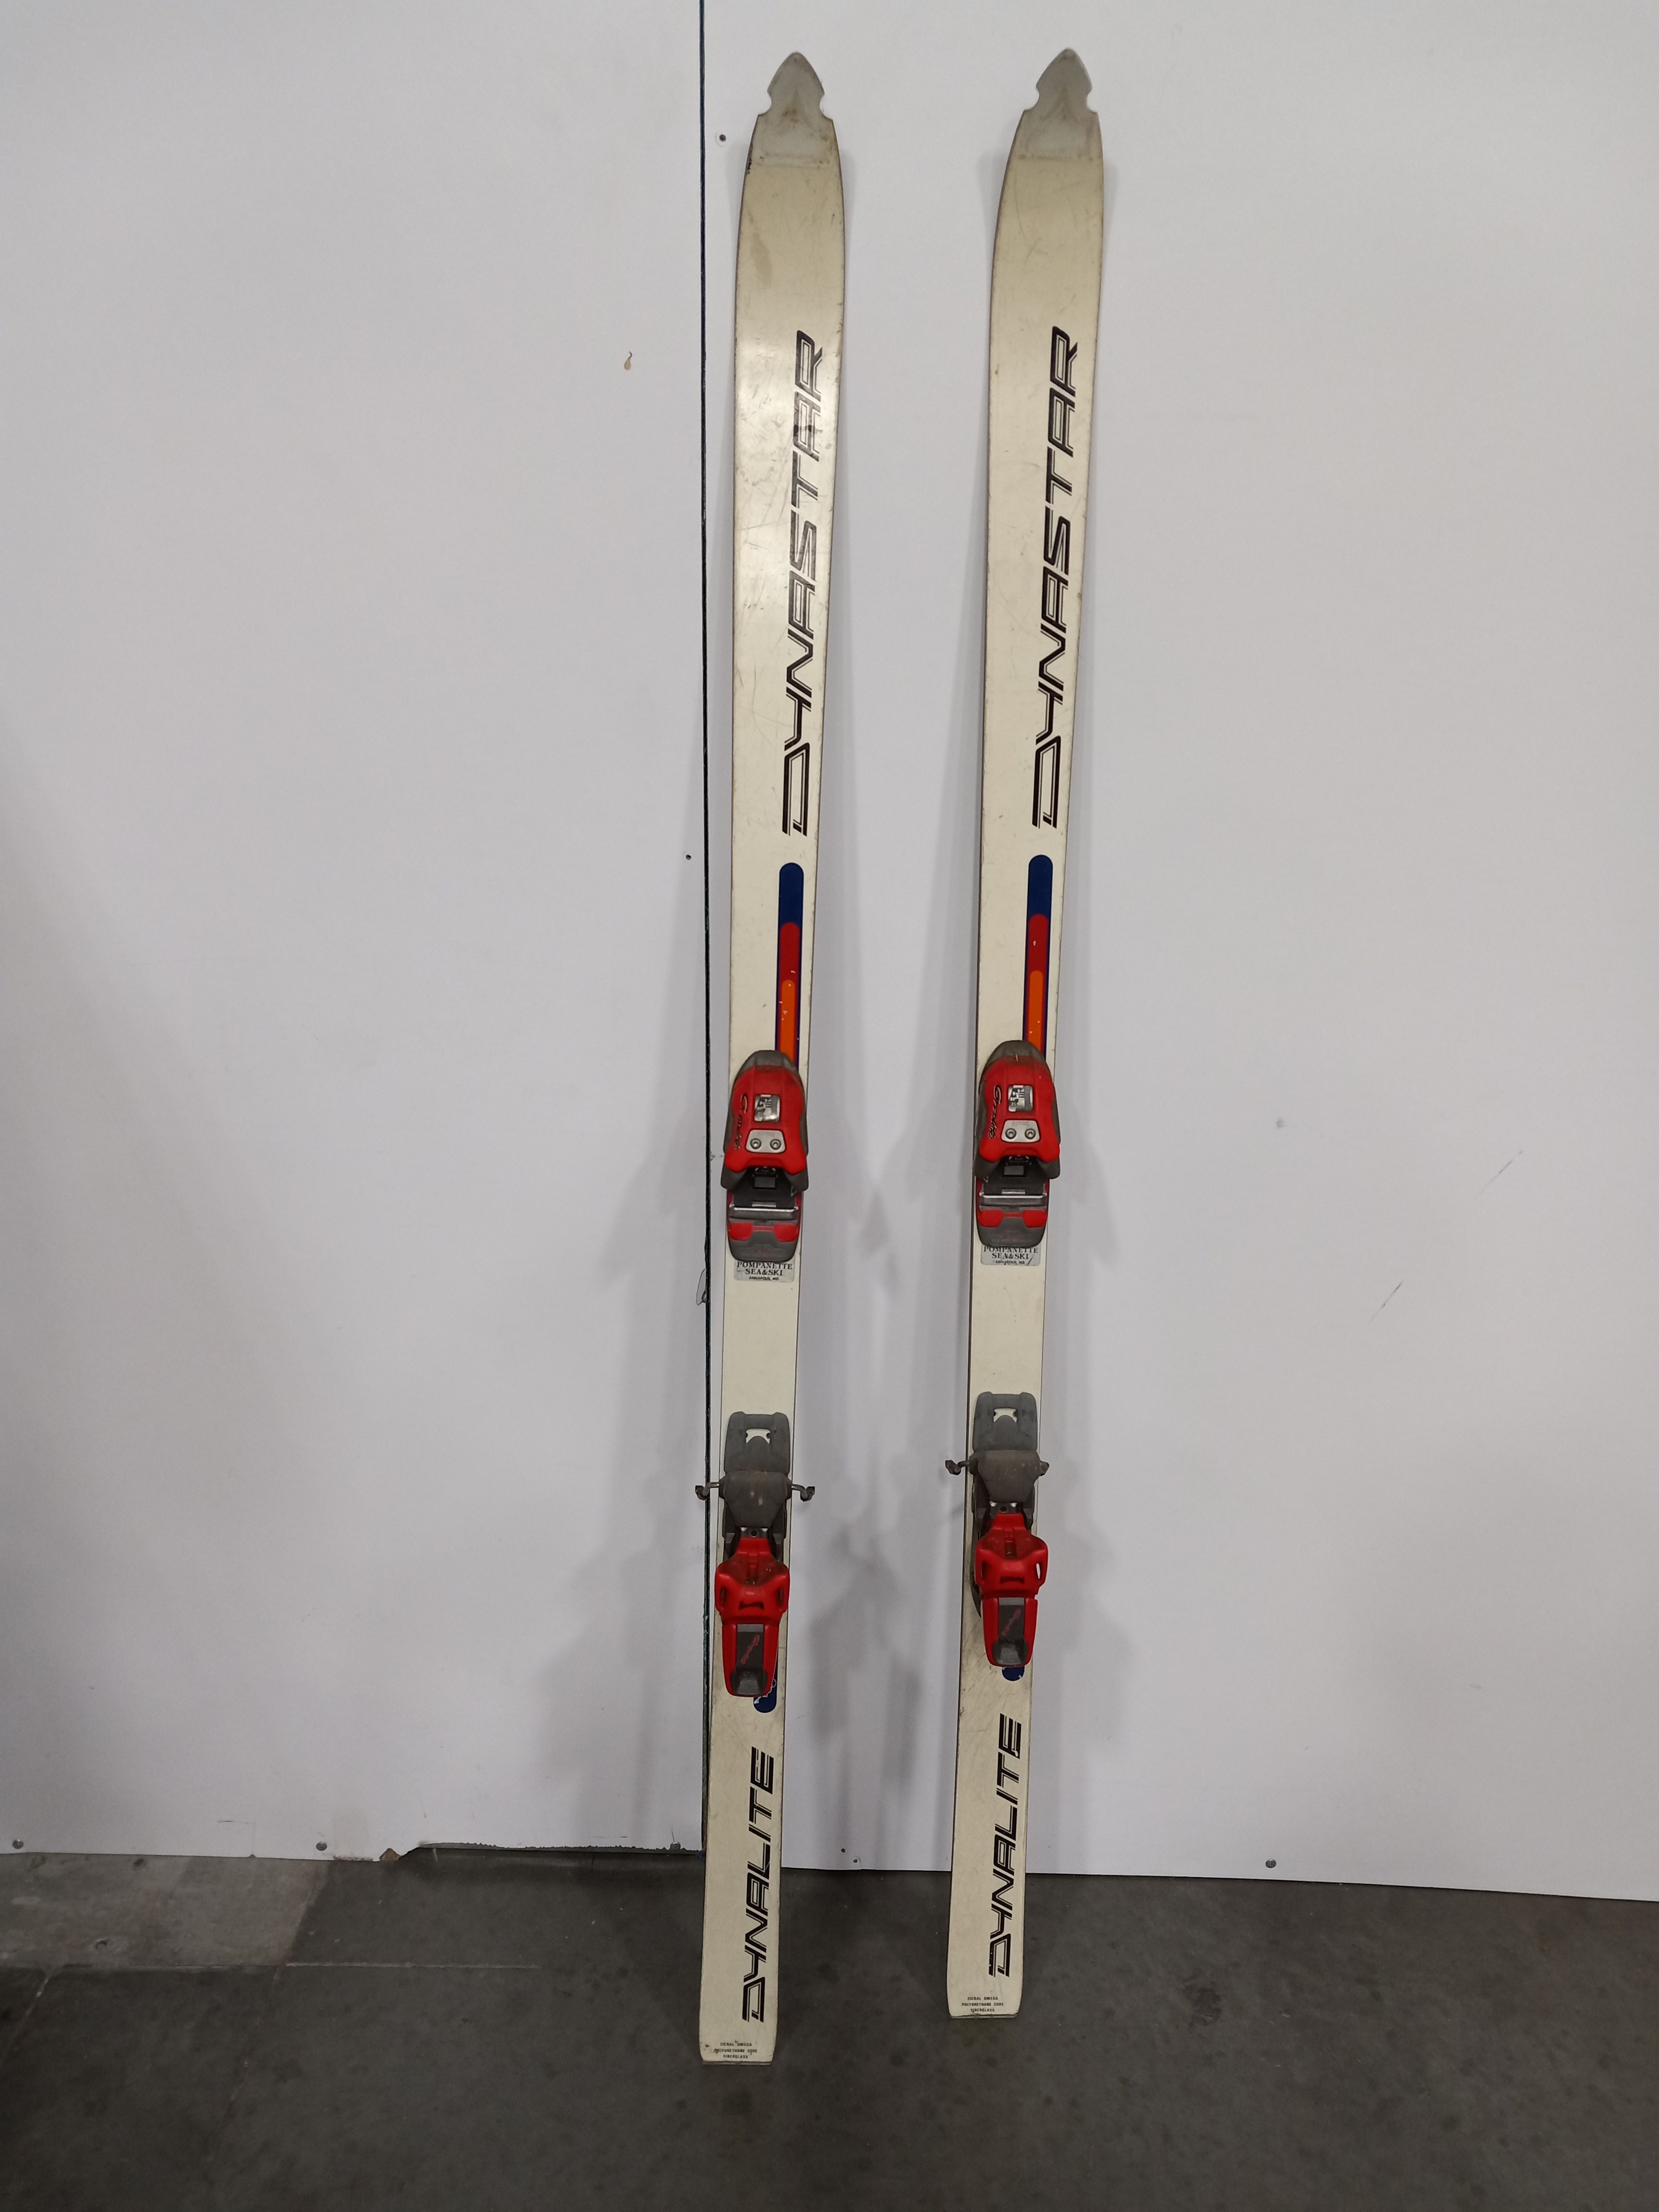 Buy the Pair of Dynastar Skis W/ Marker Bindings | GoodwillFinds